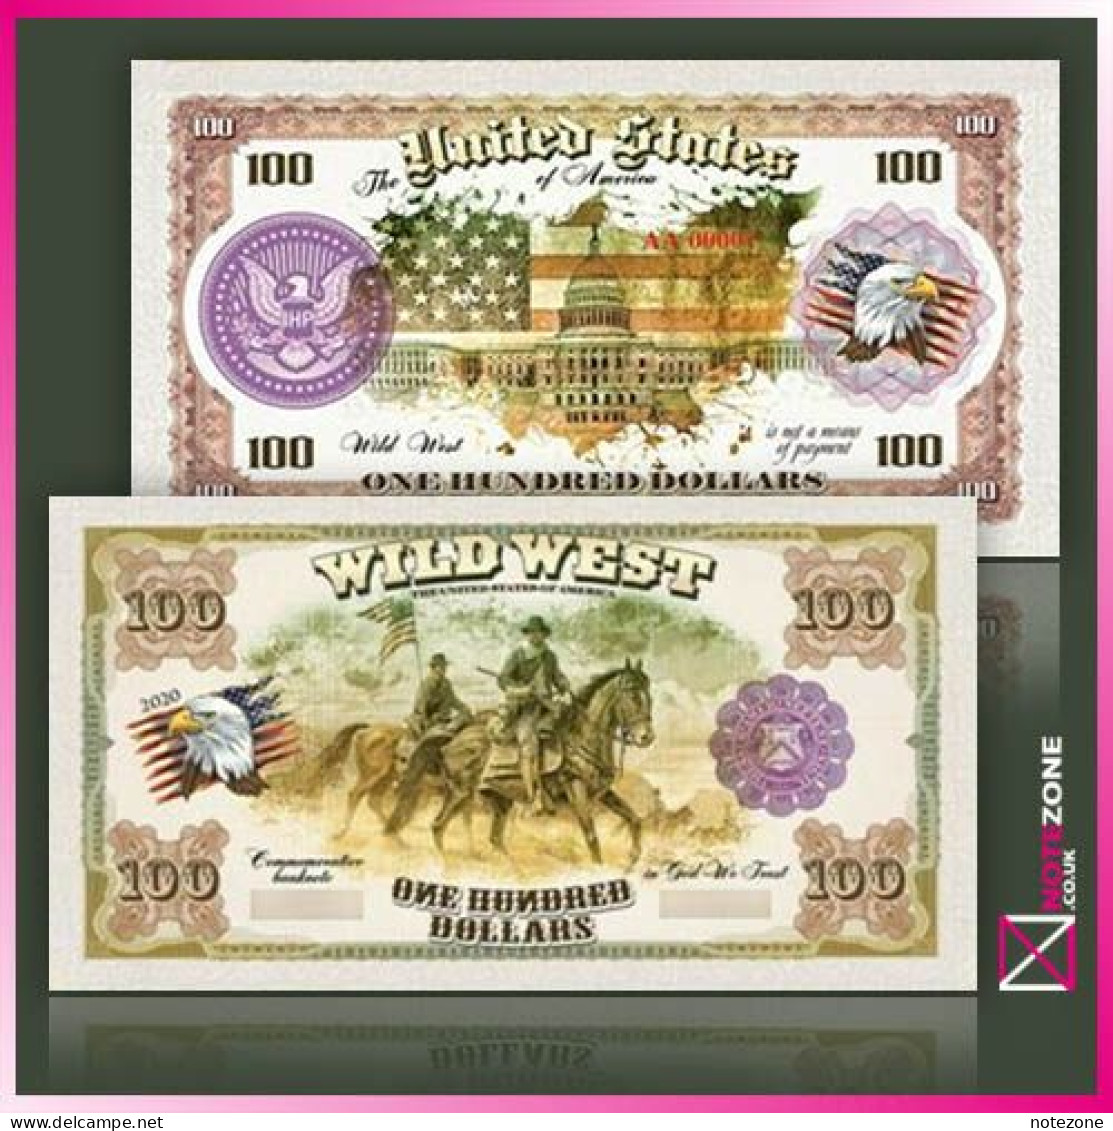 $100 USA Native Americans Wild West The Civil War PLASTIC Notes With Spot UV Private Fantasy - Colecciones Lotes Mixtos